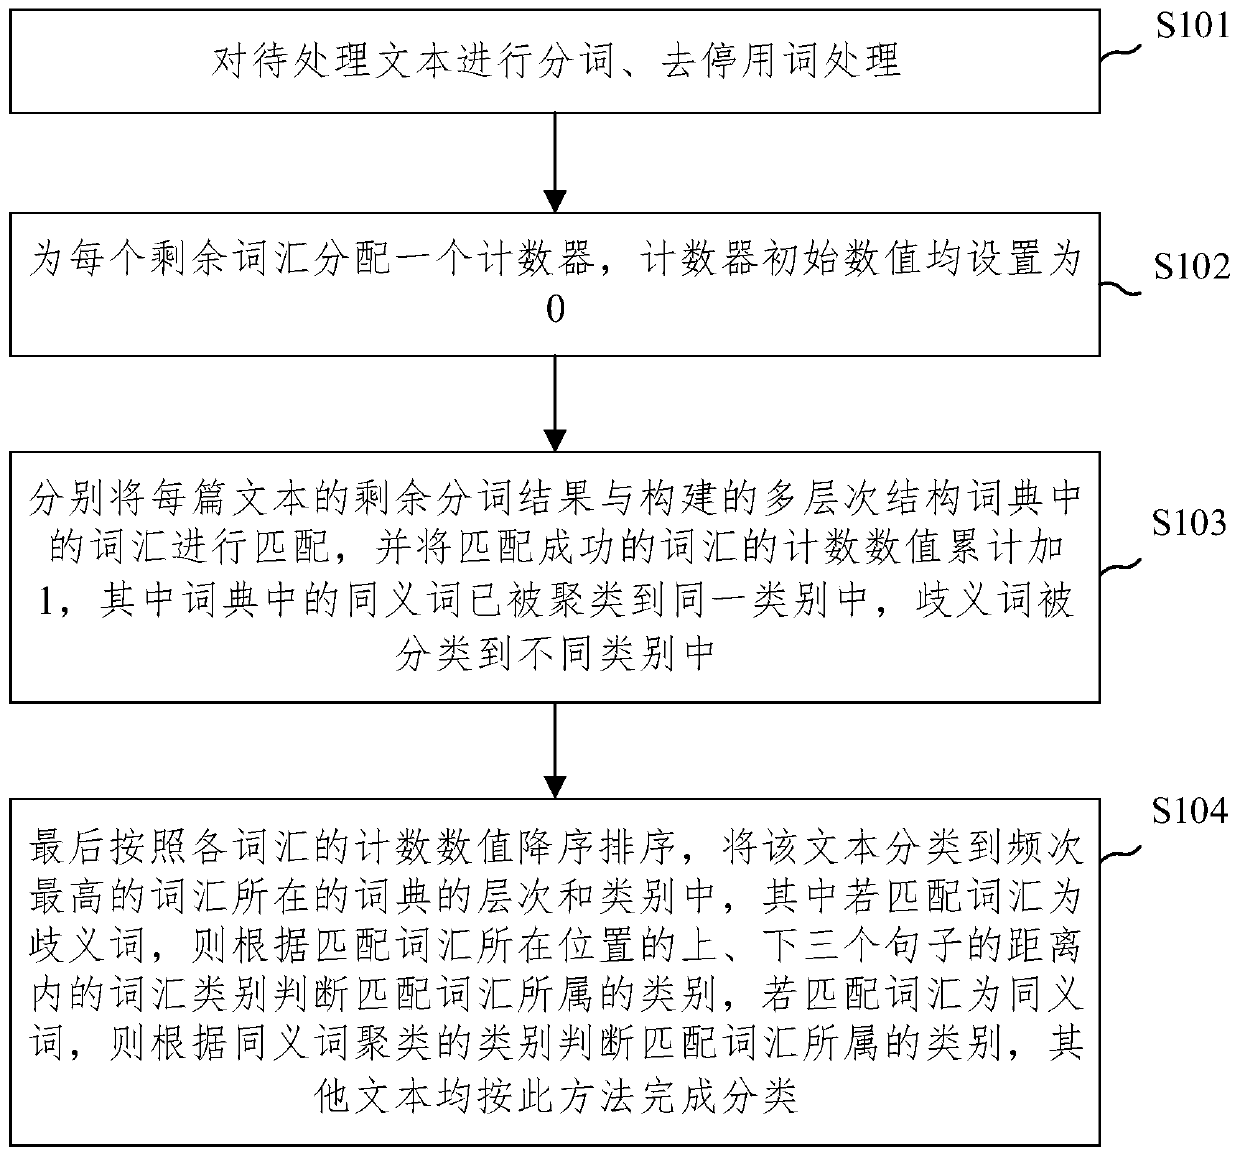 Animal product safety event text classification method based on multi-level structure dictionary